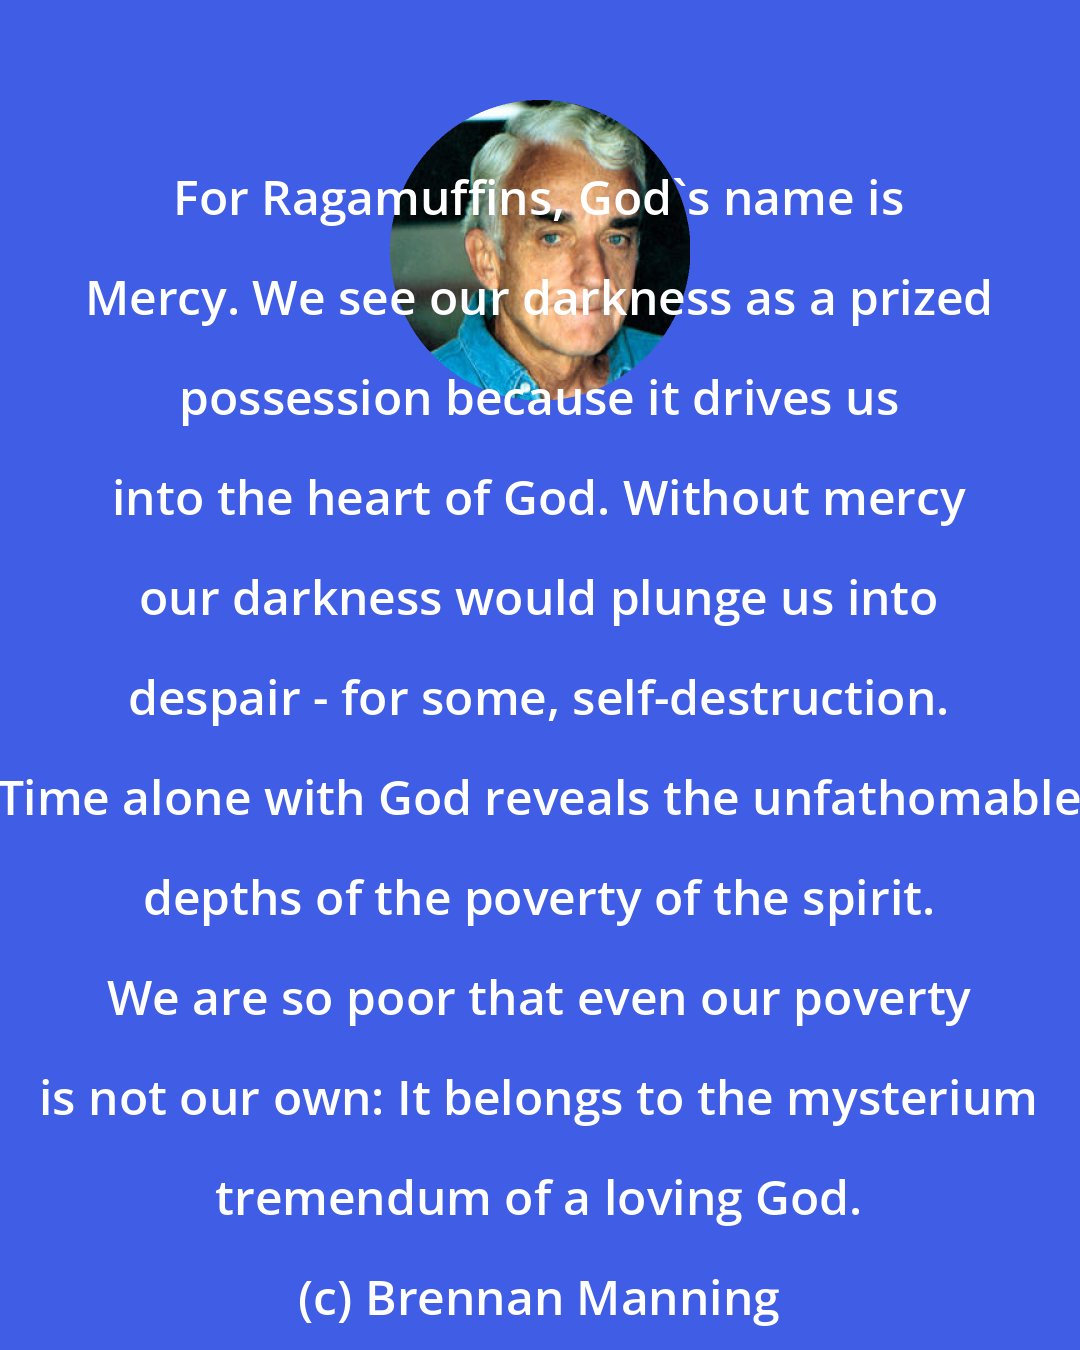 Brennan Manning: For Ragamuffins, God's name is Mercy. We see our darkness as a prized possession because it drives us into the heart of God. Without mercy our darkness would plunge us into despair - for some, self-destruction. Time alone with God reveals the unfathomable depths of the poverty of the spirit. We are so poor that even our poverty is not our own: It belongs to the mysterium tremendum of a loving God.